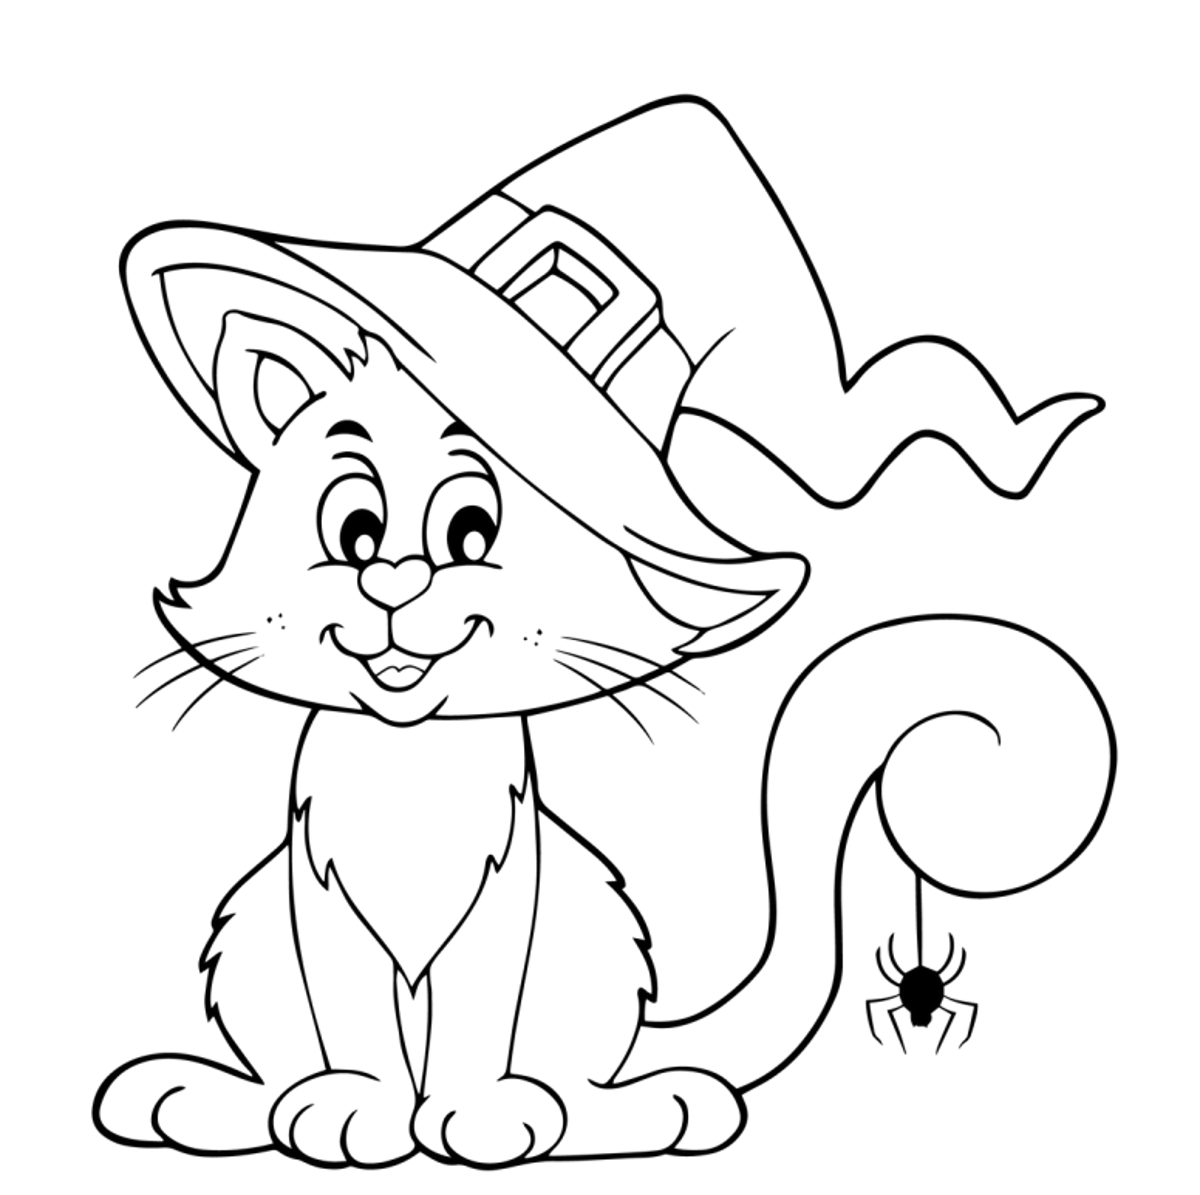 Free printable halloween coloring book for kids